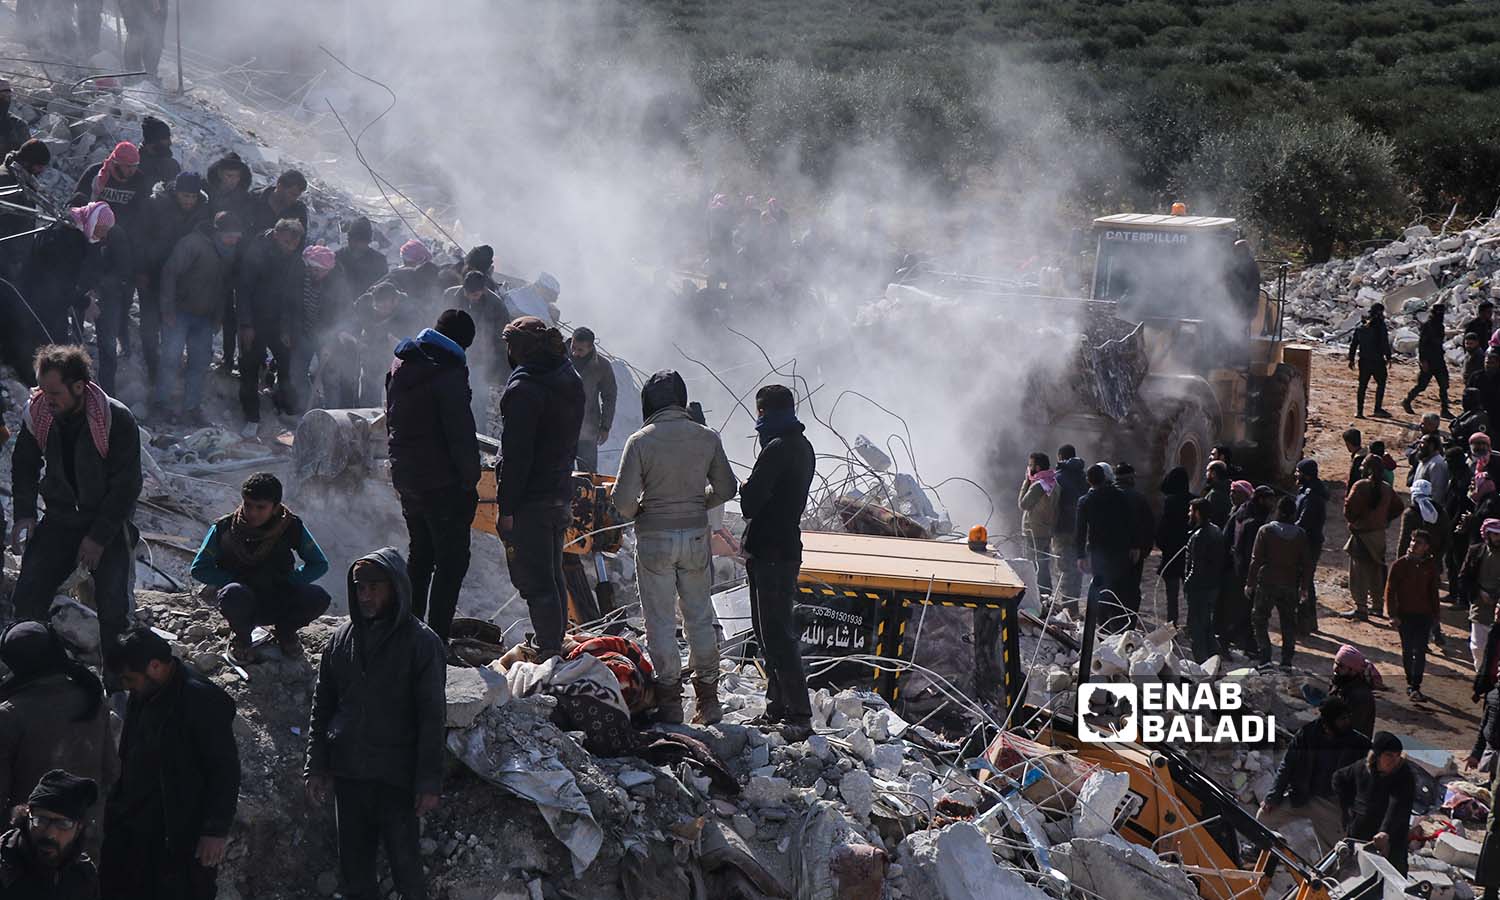 Rescue teams and volunteer residents search for victims and survivors amidst the rubble of collapsed buildings following an earthquake that struck northwestern Syria in the village of Basnia near the city of Harem on the Syrian-Turkish border - February 7, 2023 (Enab Baladi/Mohammad Nasan Dabel)